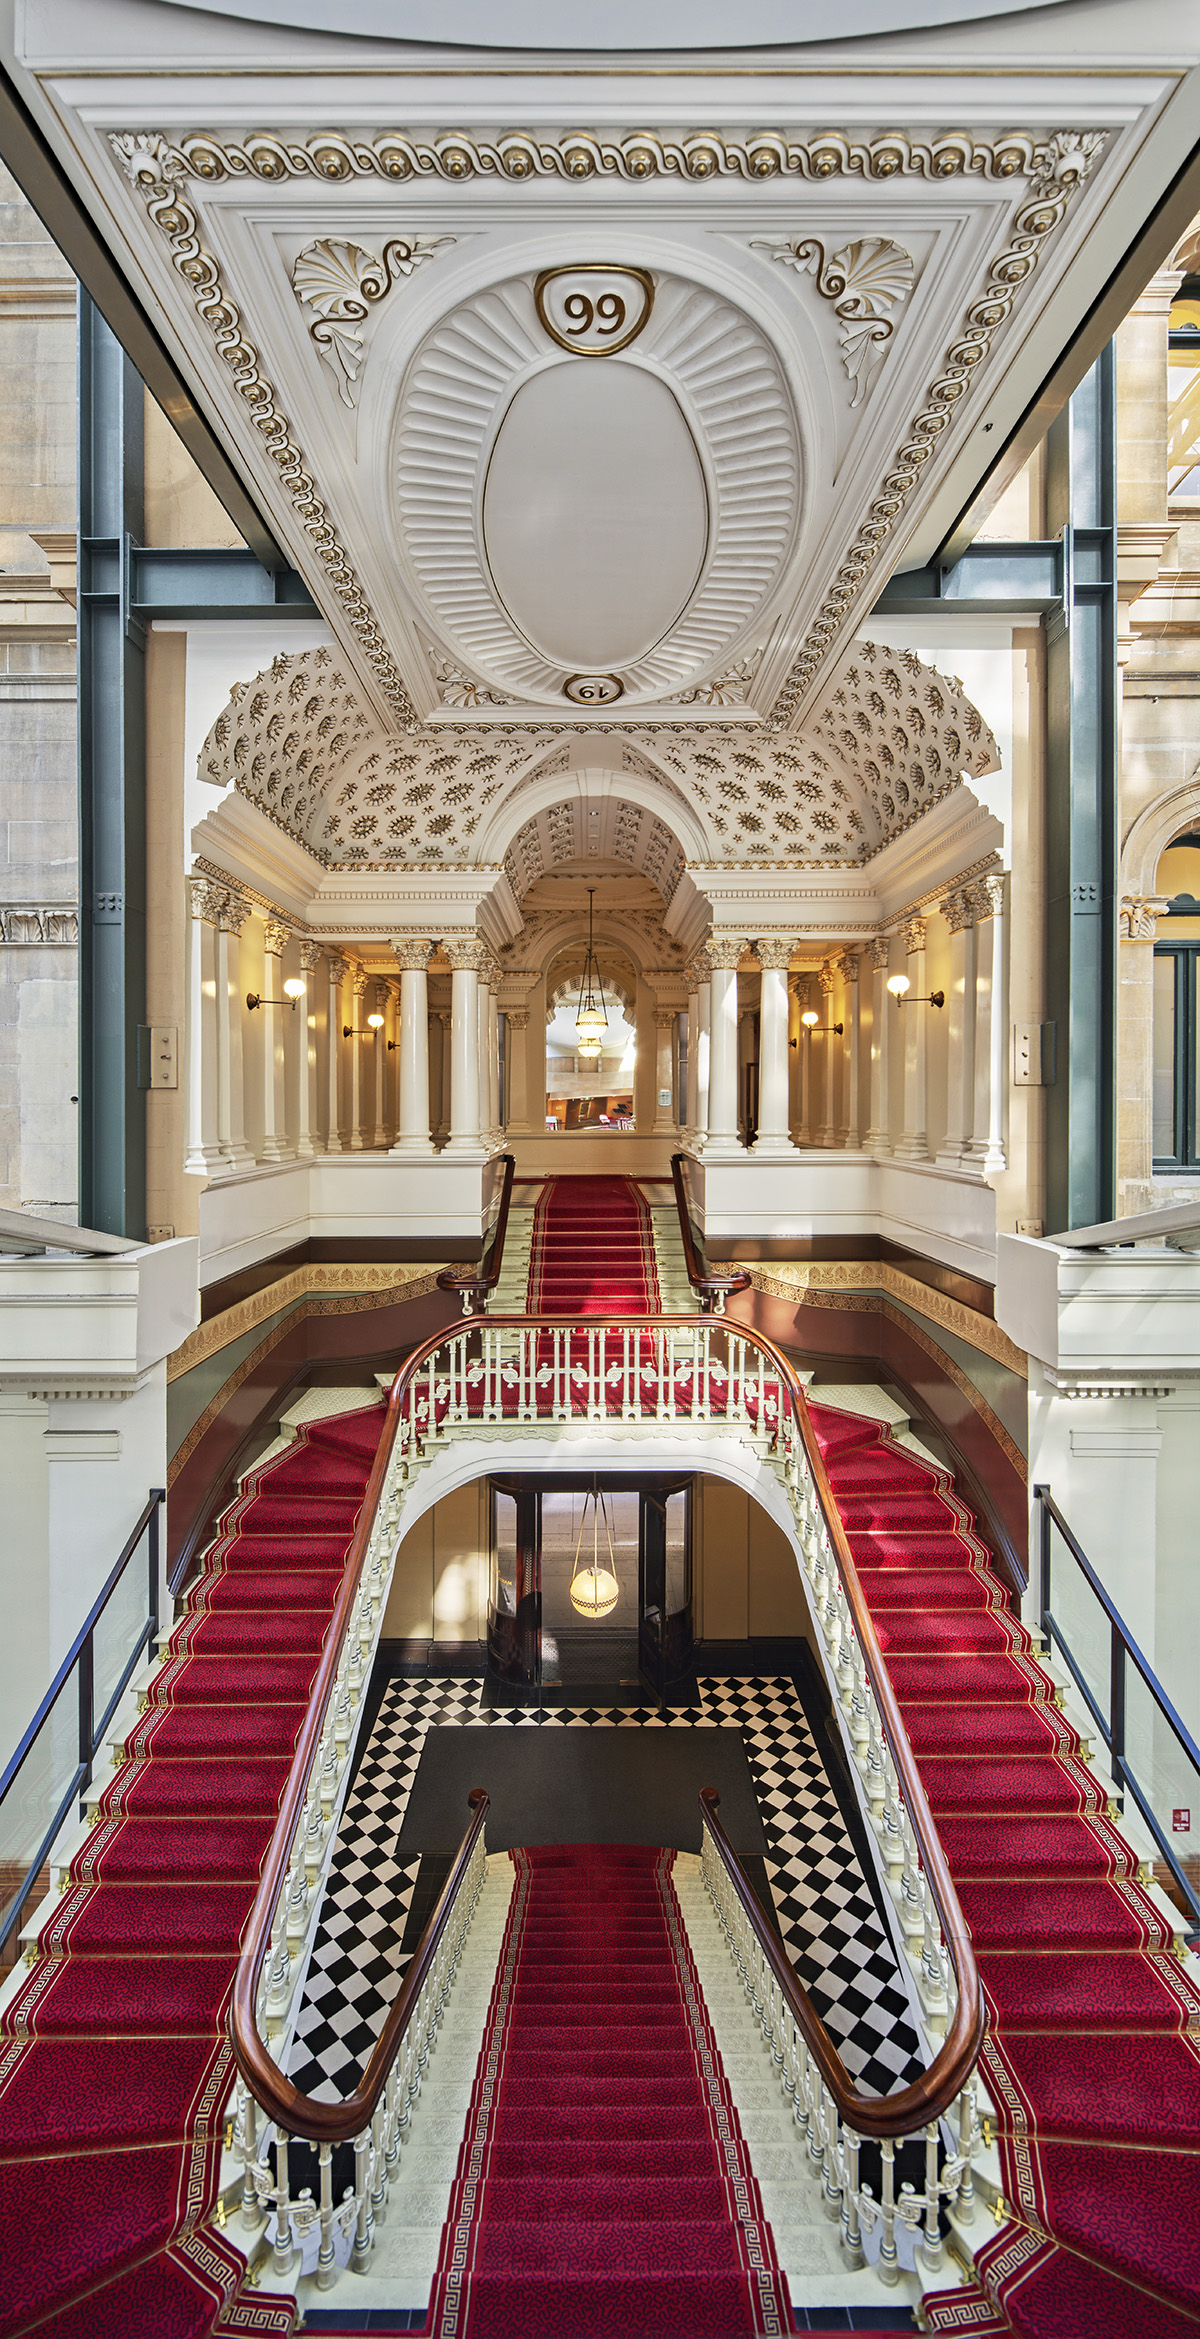 Grand staircase inside luxury hotel